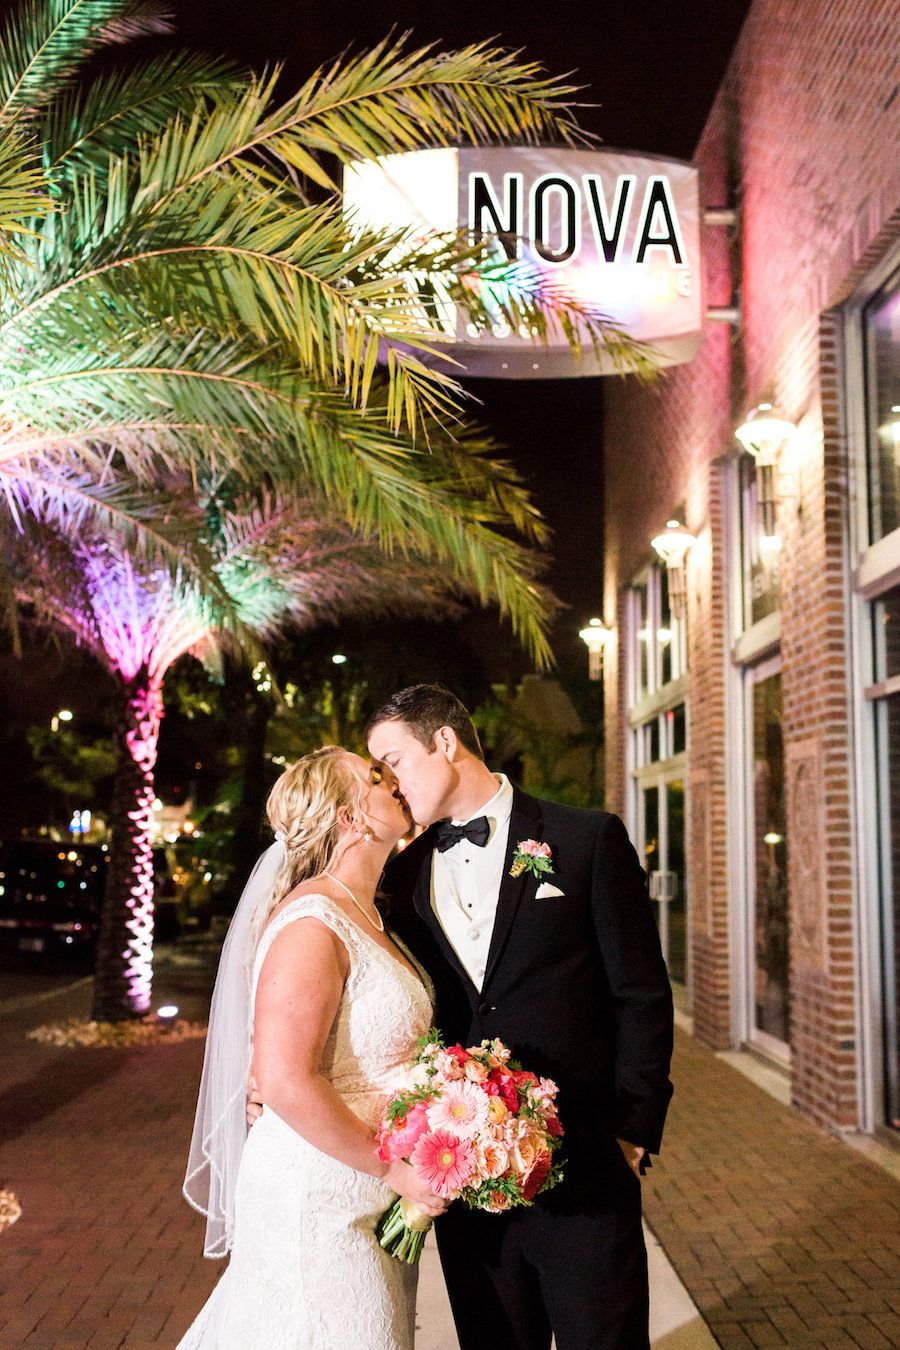 Outdoor, St Pete Wedding Ceremony, Bride and Groom First Kiss Portrait| St. Pete Wedding and Event Space NOVA 535